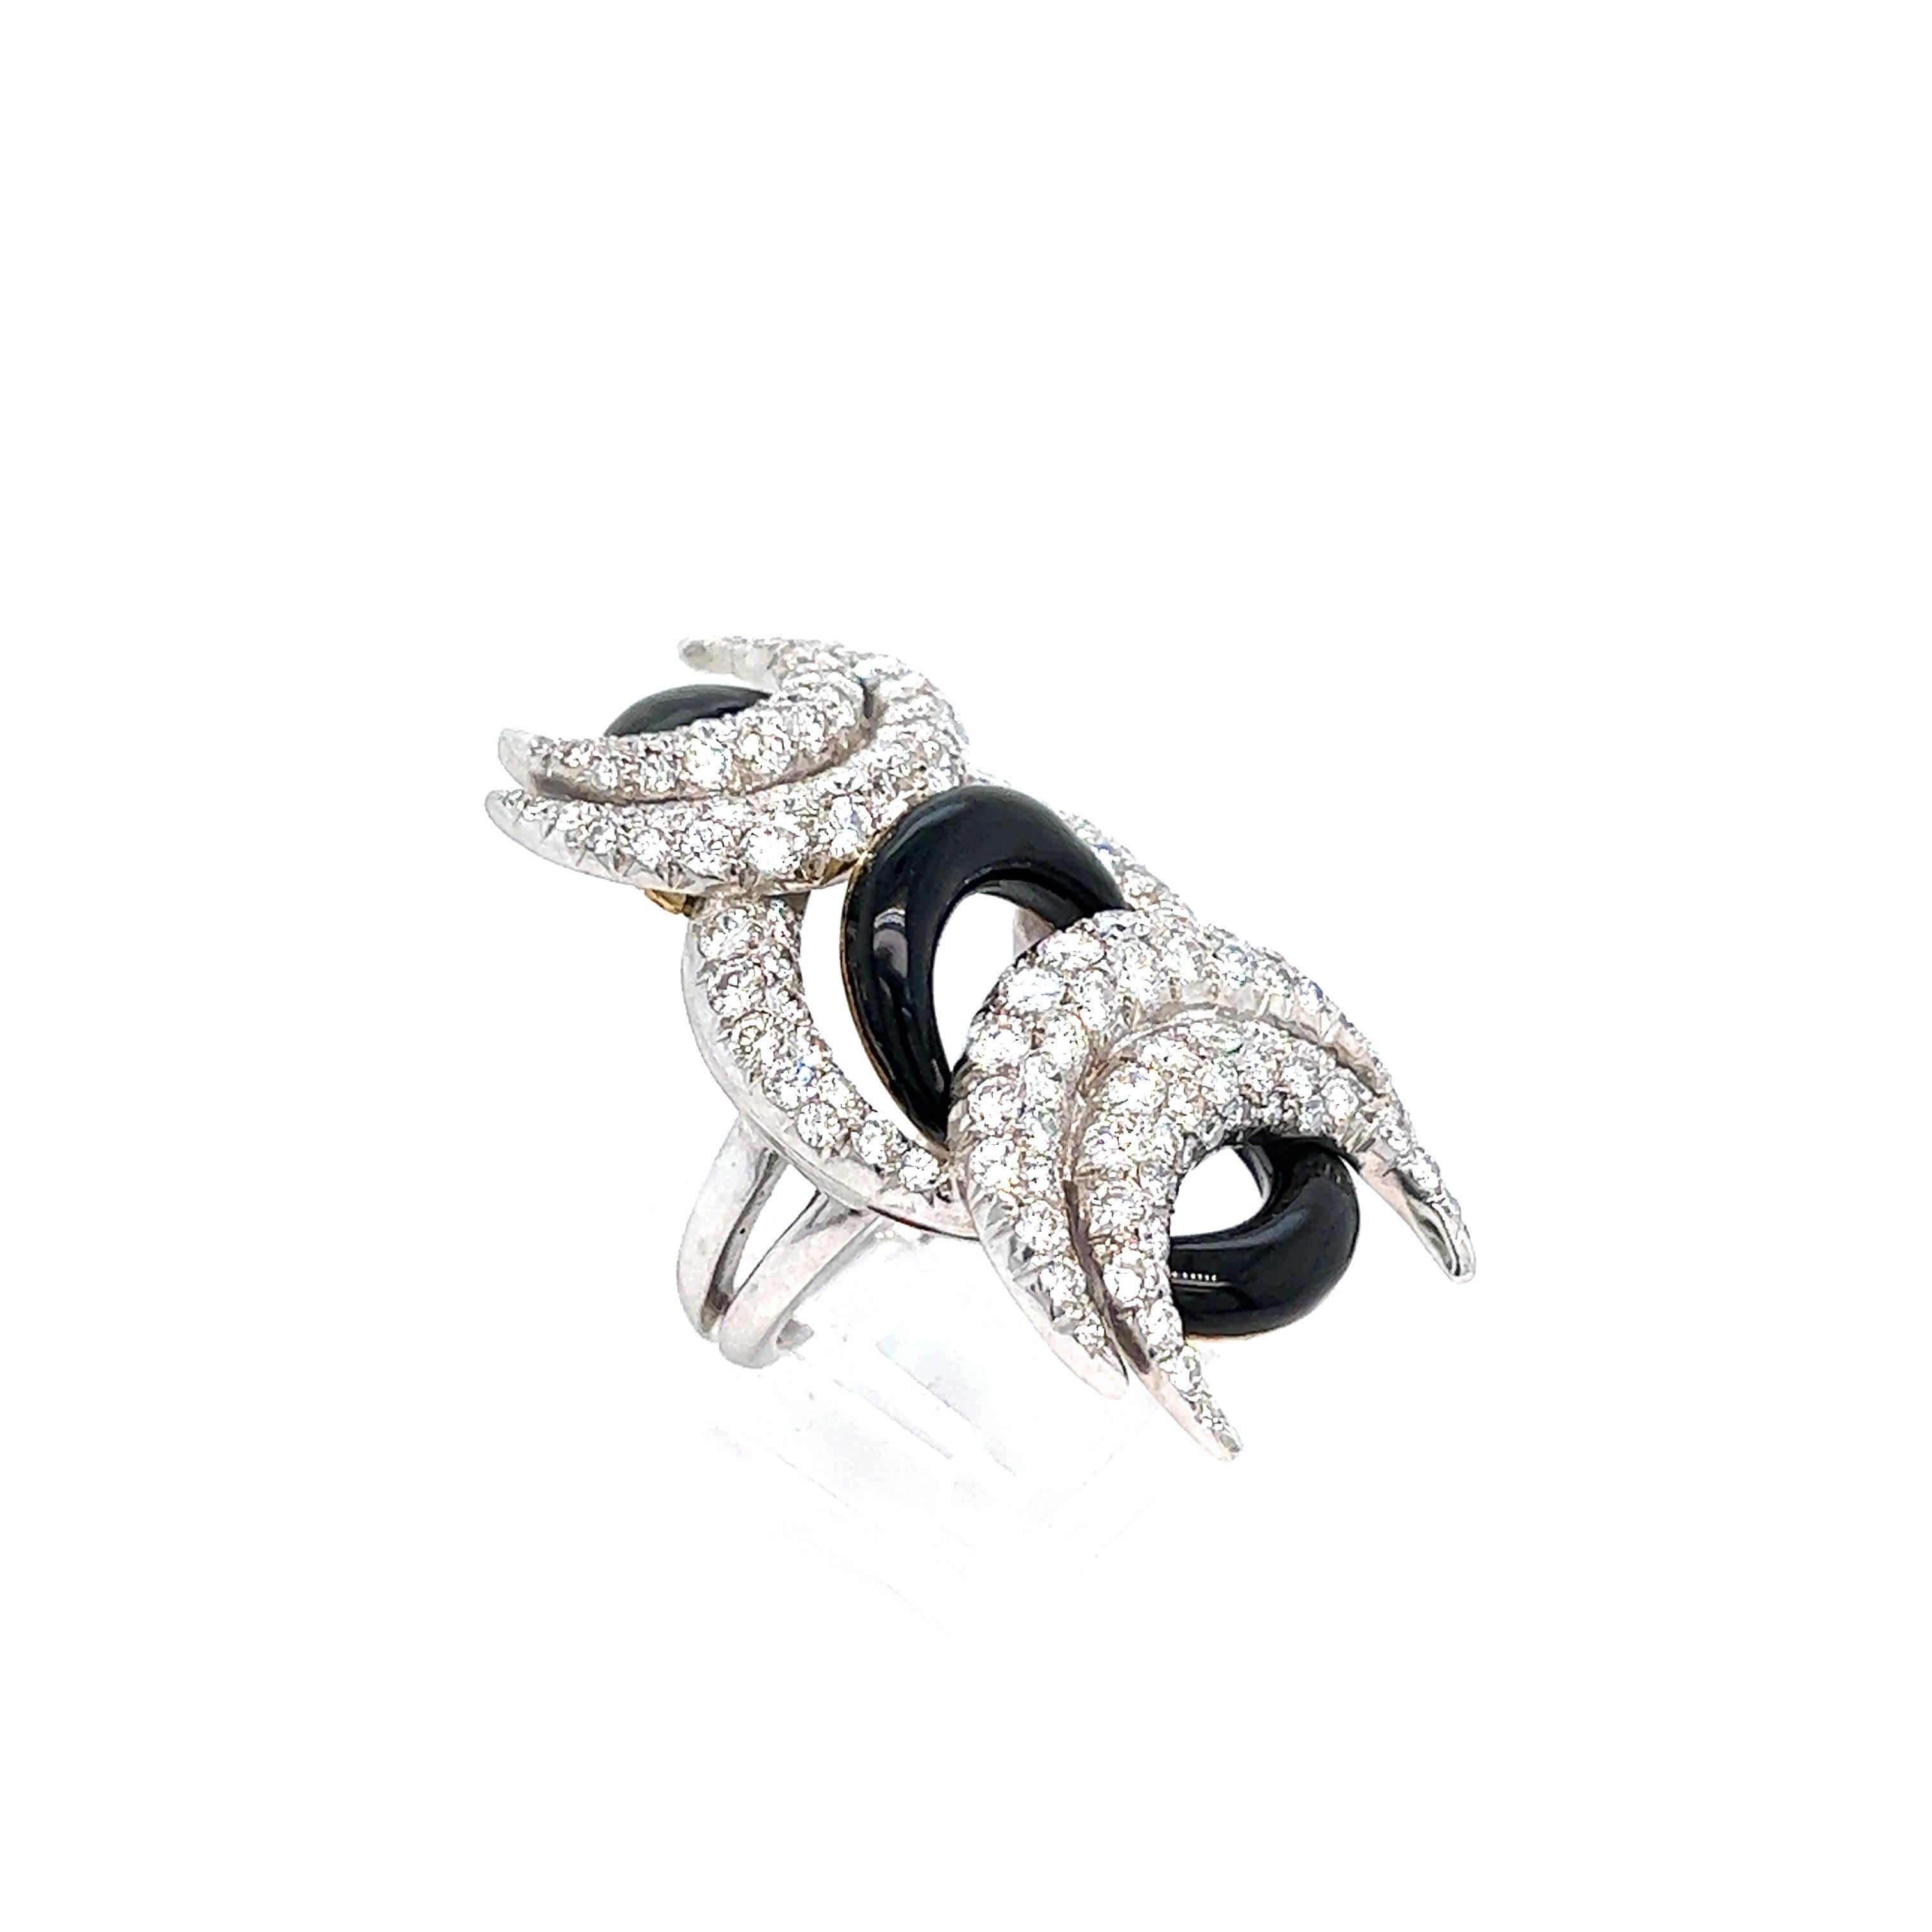 Cartier crescent moons diamond black onyx ring

18 karat white gold and platinum, featuring a crescent moon design; five of the eight moons are made out of diamonds weighing approximately 3.5 carats, while the remaining three are made out of black